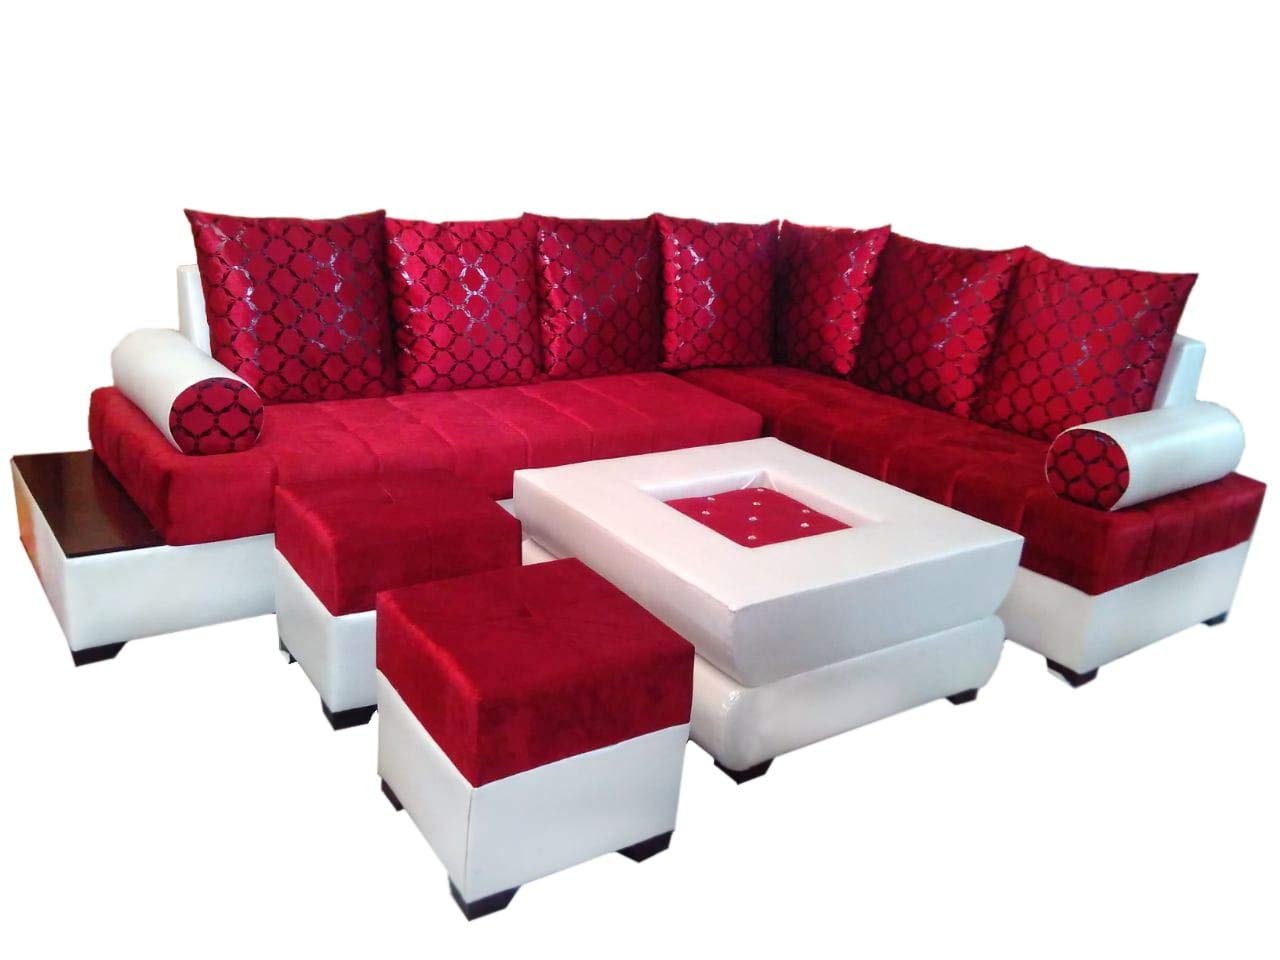 L Shape Sofa Set:- Half Leather Sofa Set with Center Table and 2 Puffy! |  GKW Retail